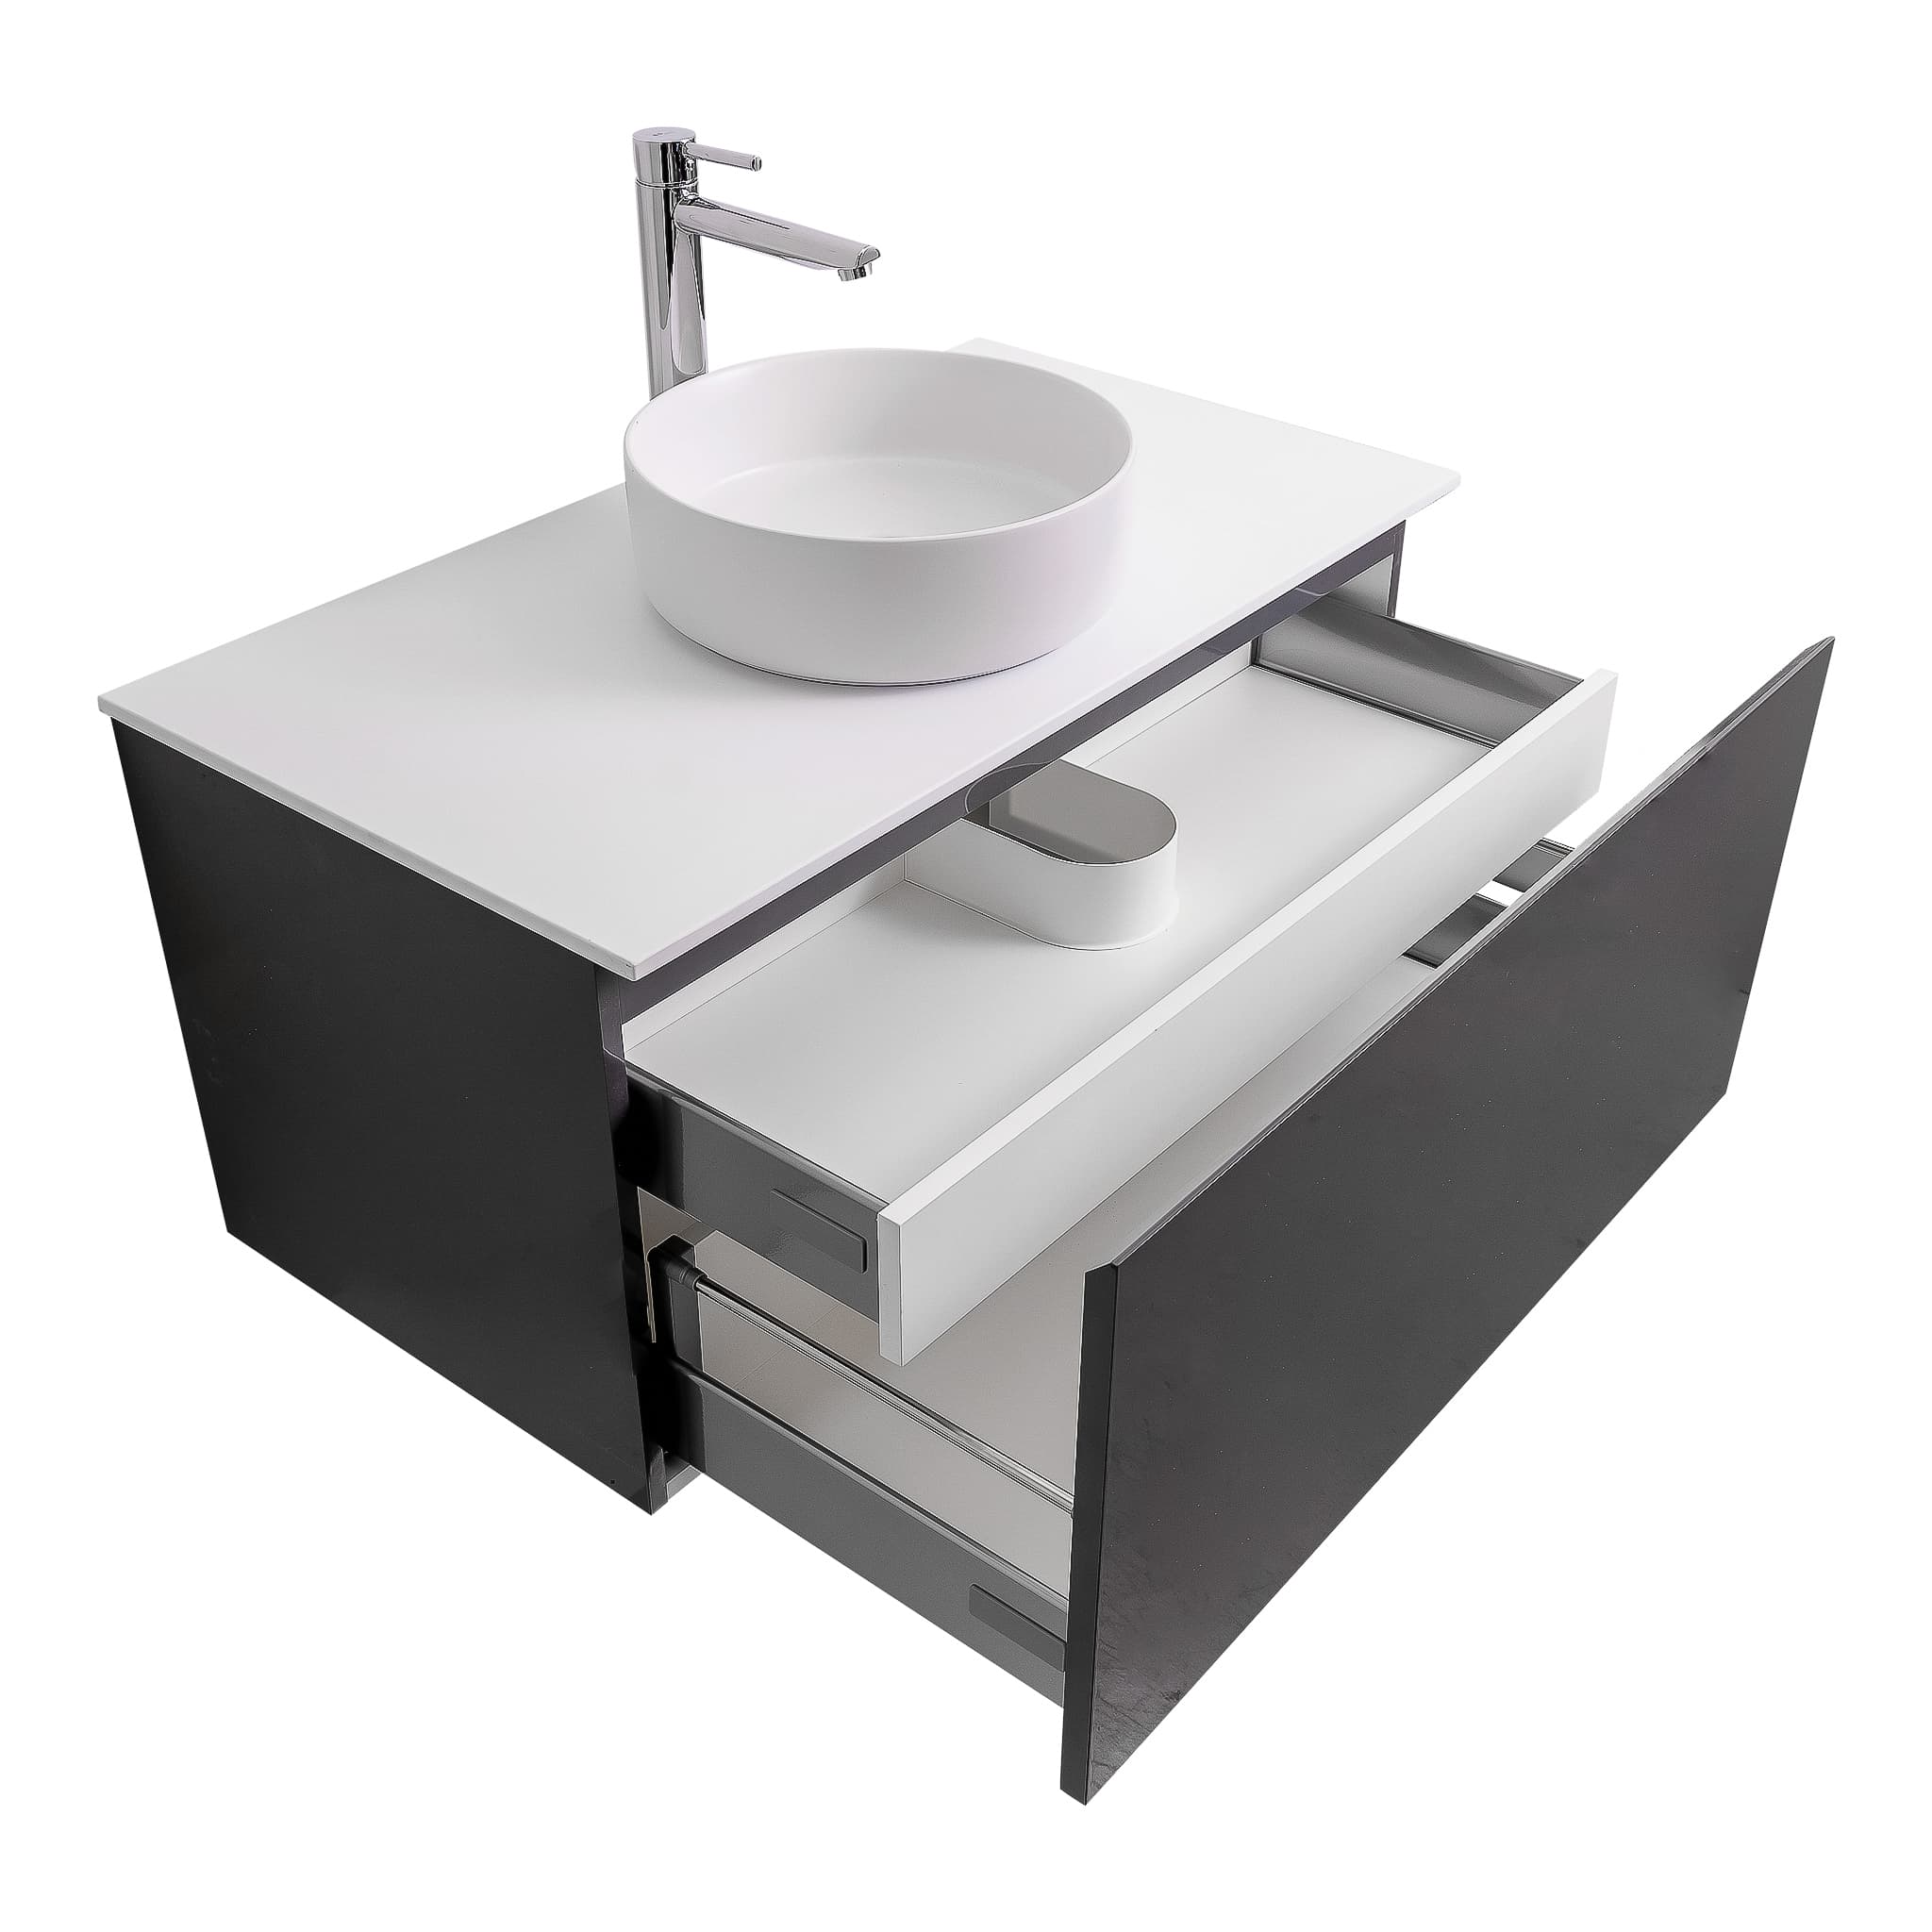 Venice 31.5 Anthracite High Gloss Cabinet, Ares White Top And Ares White Ceramic Basin, Wall Mounted Modern Vanity Set